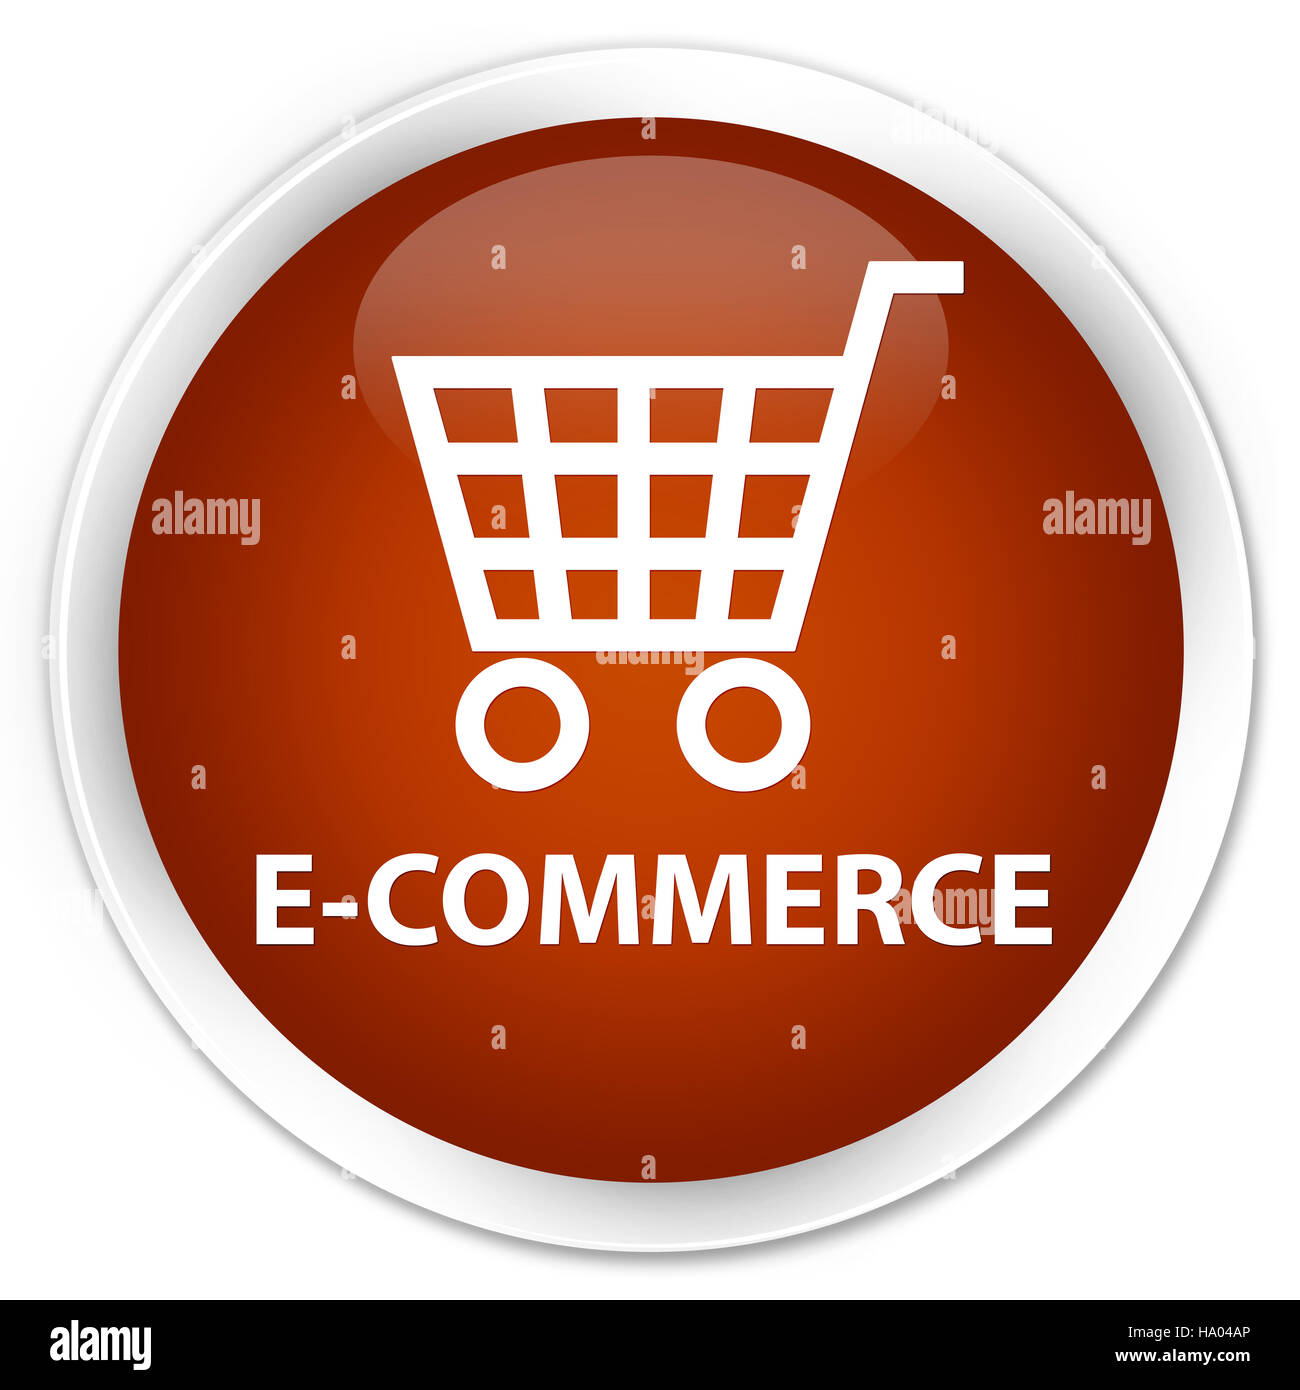 E-commerce isolated on premium brown round button abstract illustration Stock Photo